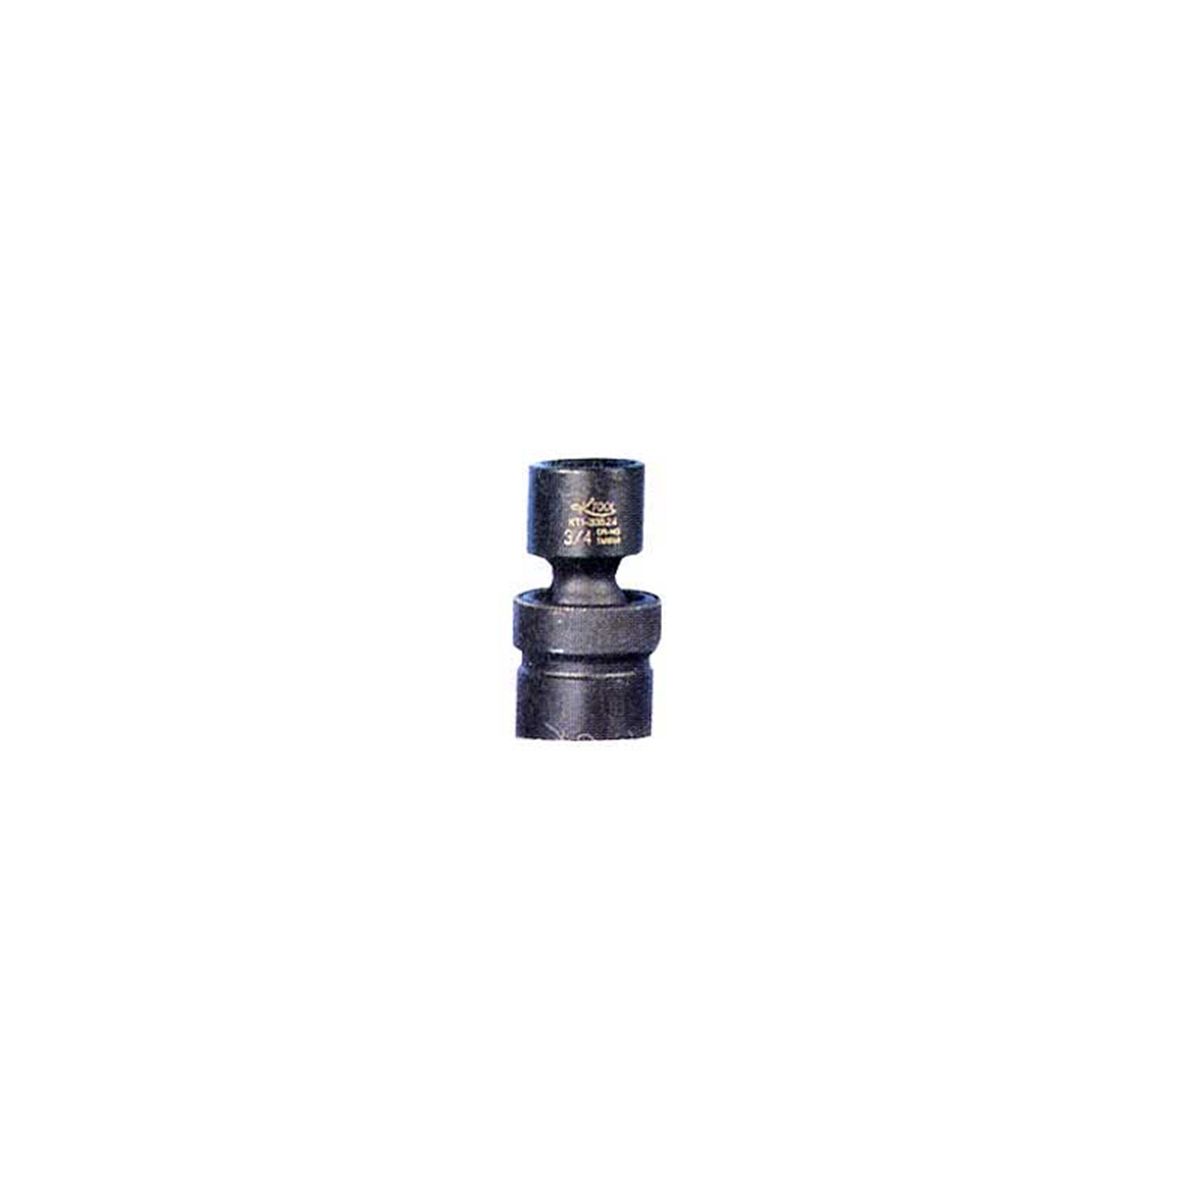 Shallow Flex Impact Socket - 3/8 In Dr 6 Pt - 3/4 In